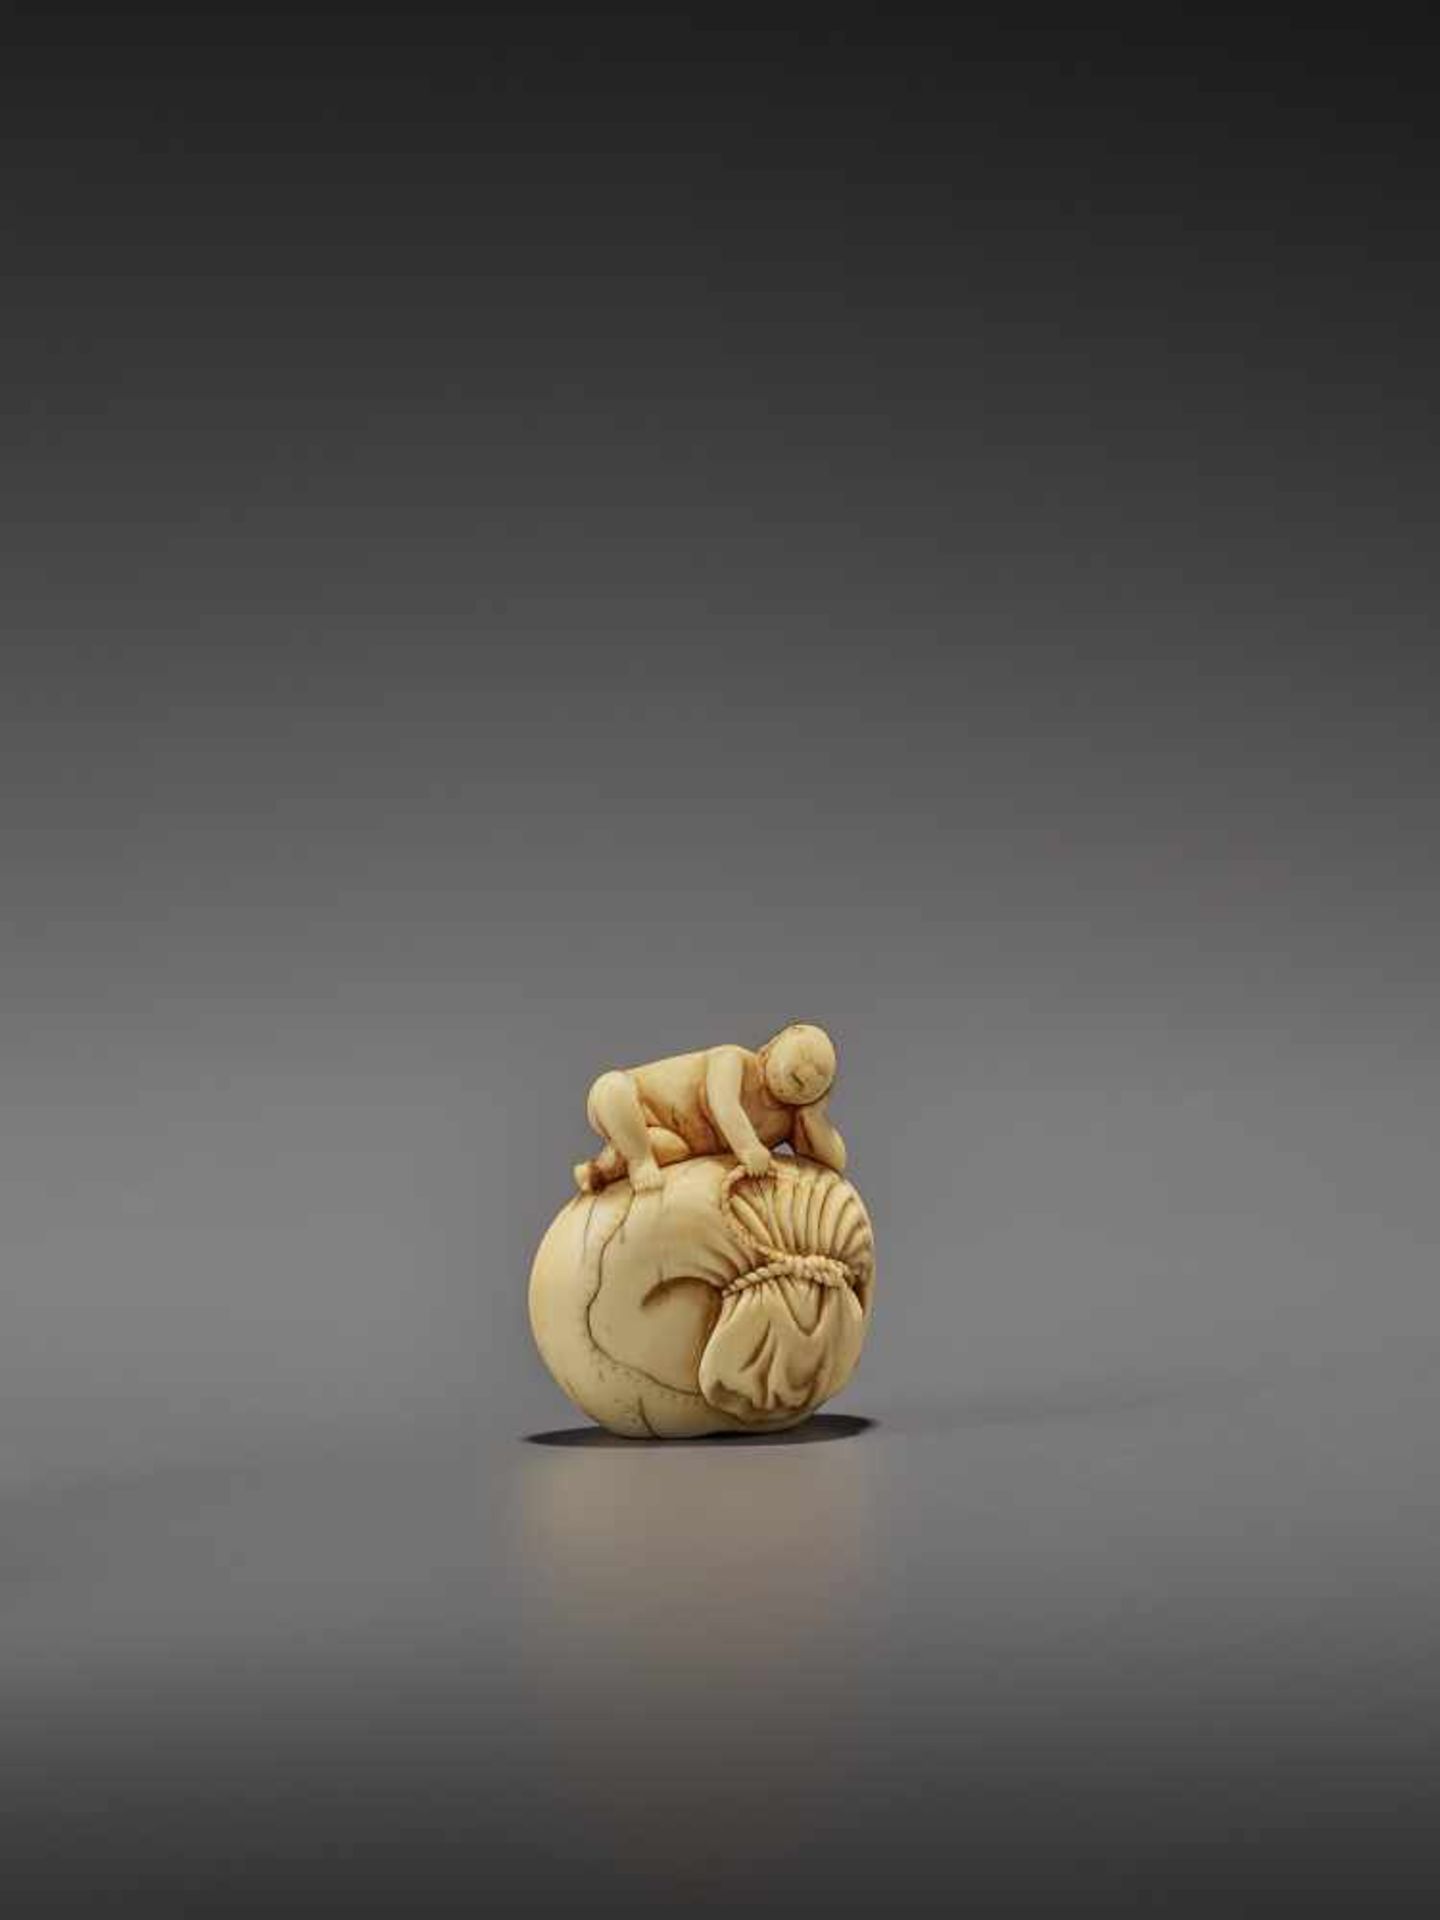 AN EARLY IVORY NETSUKE OF A NAKED MAN SLEEPING ON A BAG UnsignedJapan, mid-18th century, Edo - Image 7 of 8